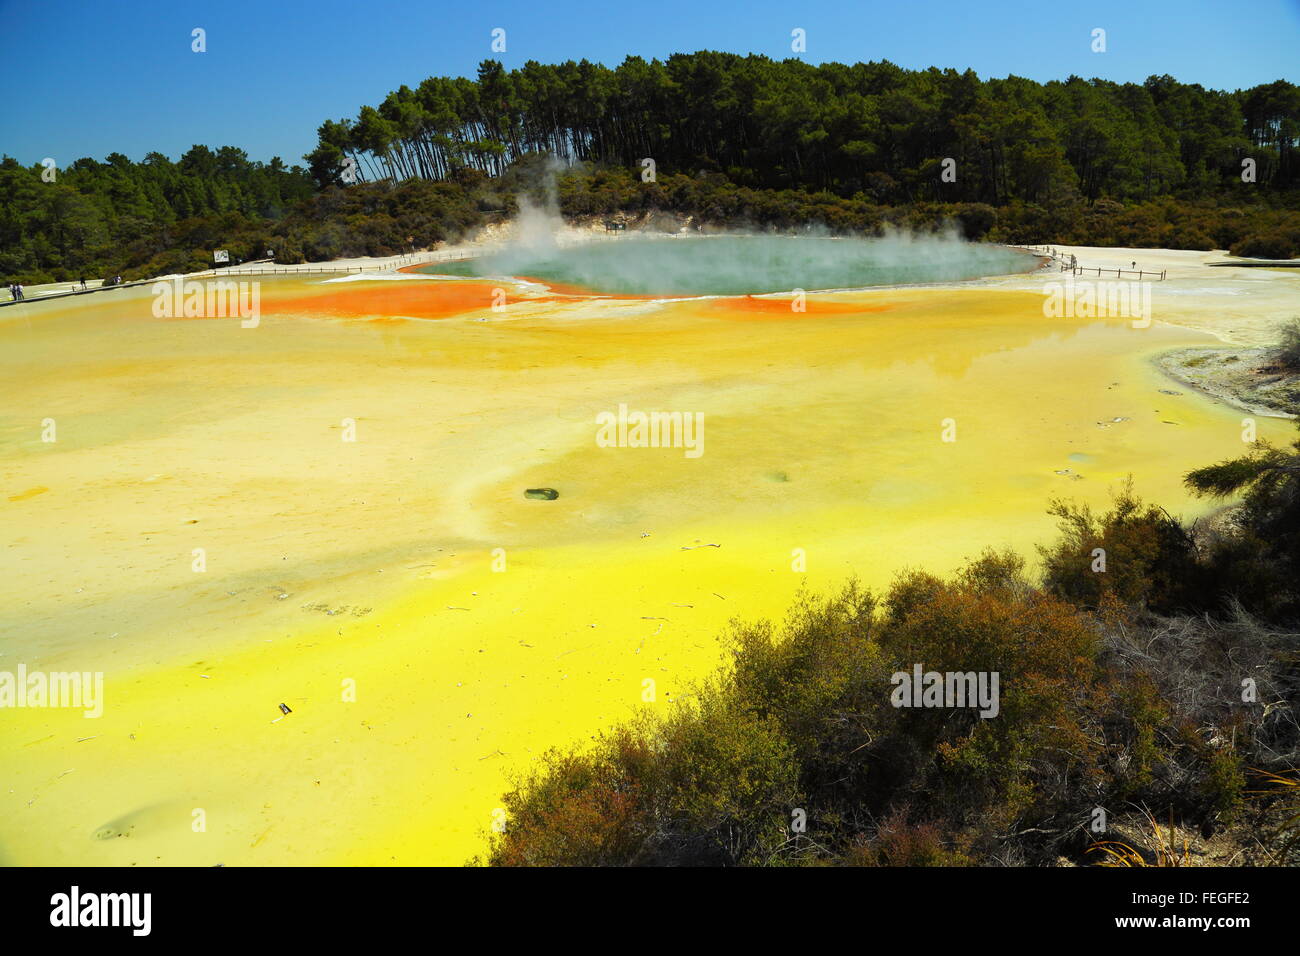 Champagne Pool in the stunning and amazing geothermal landscape of Wai-O-Tapu thermal area, Rotorua, New Zealand. Stock Photo